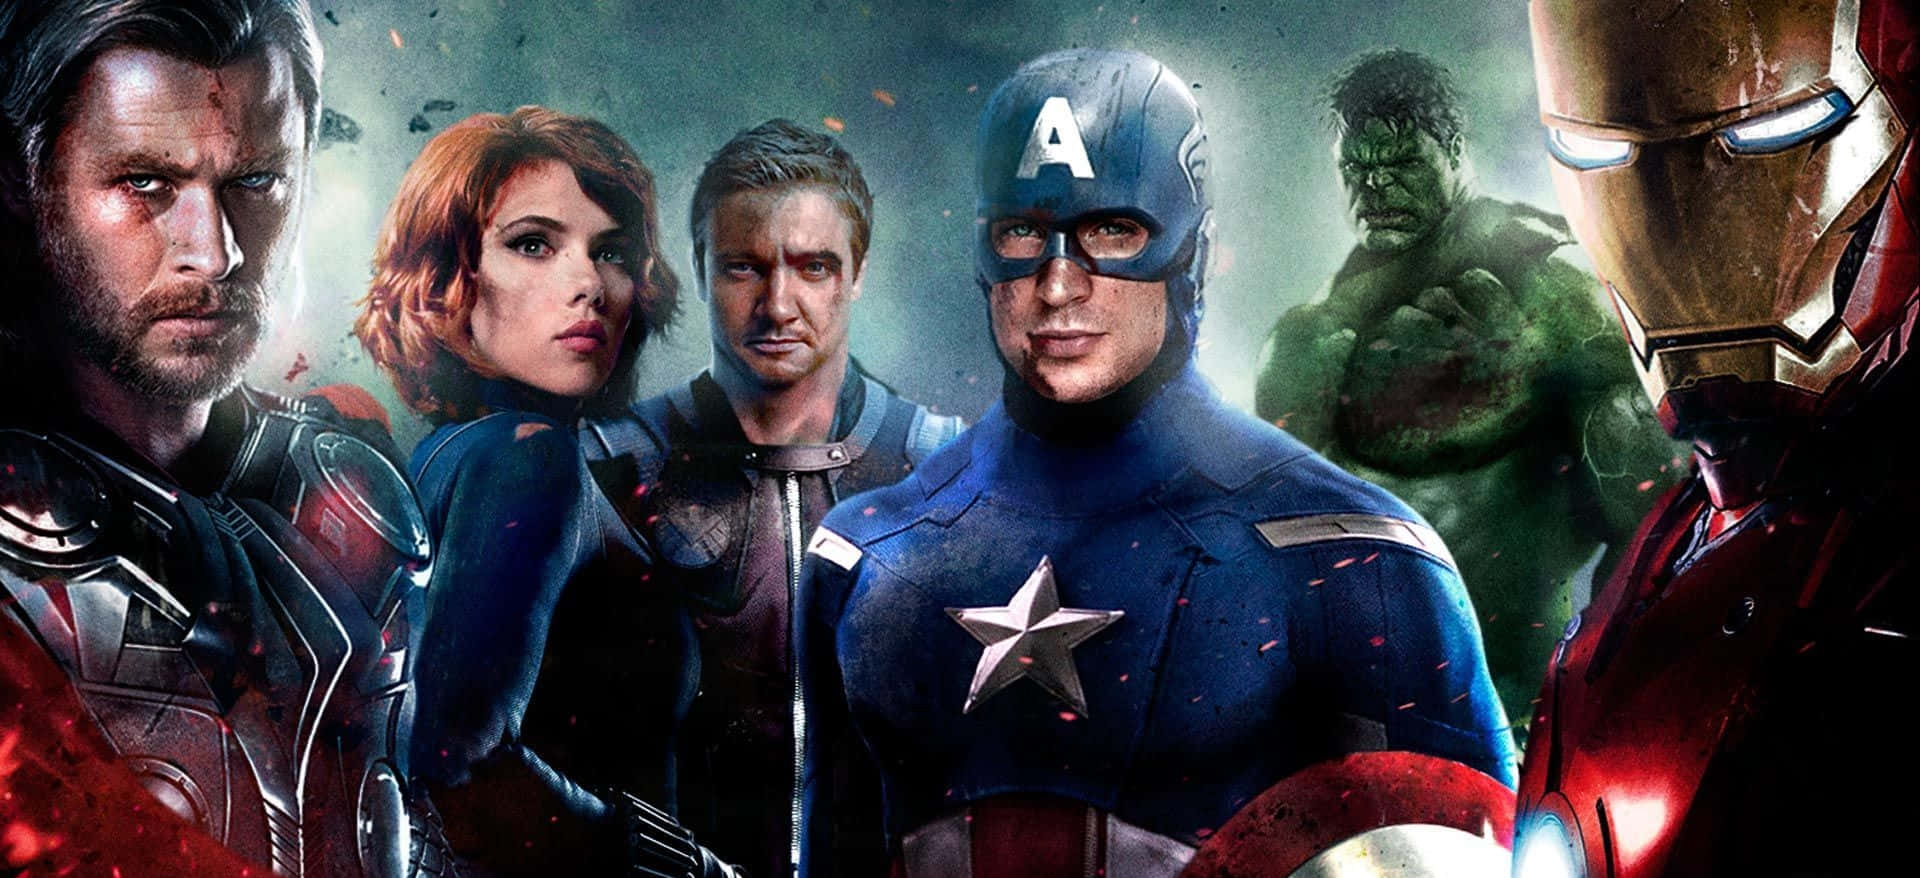 Be the hero the world needs - get inspired by the Marvel Movie!" Wallpaper